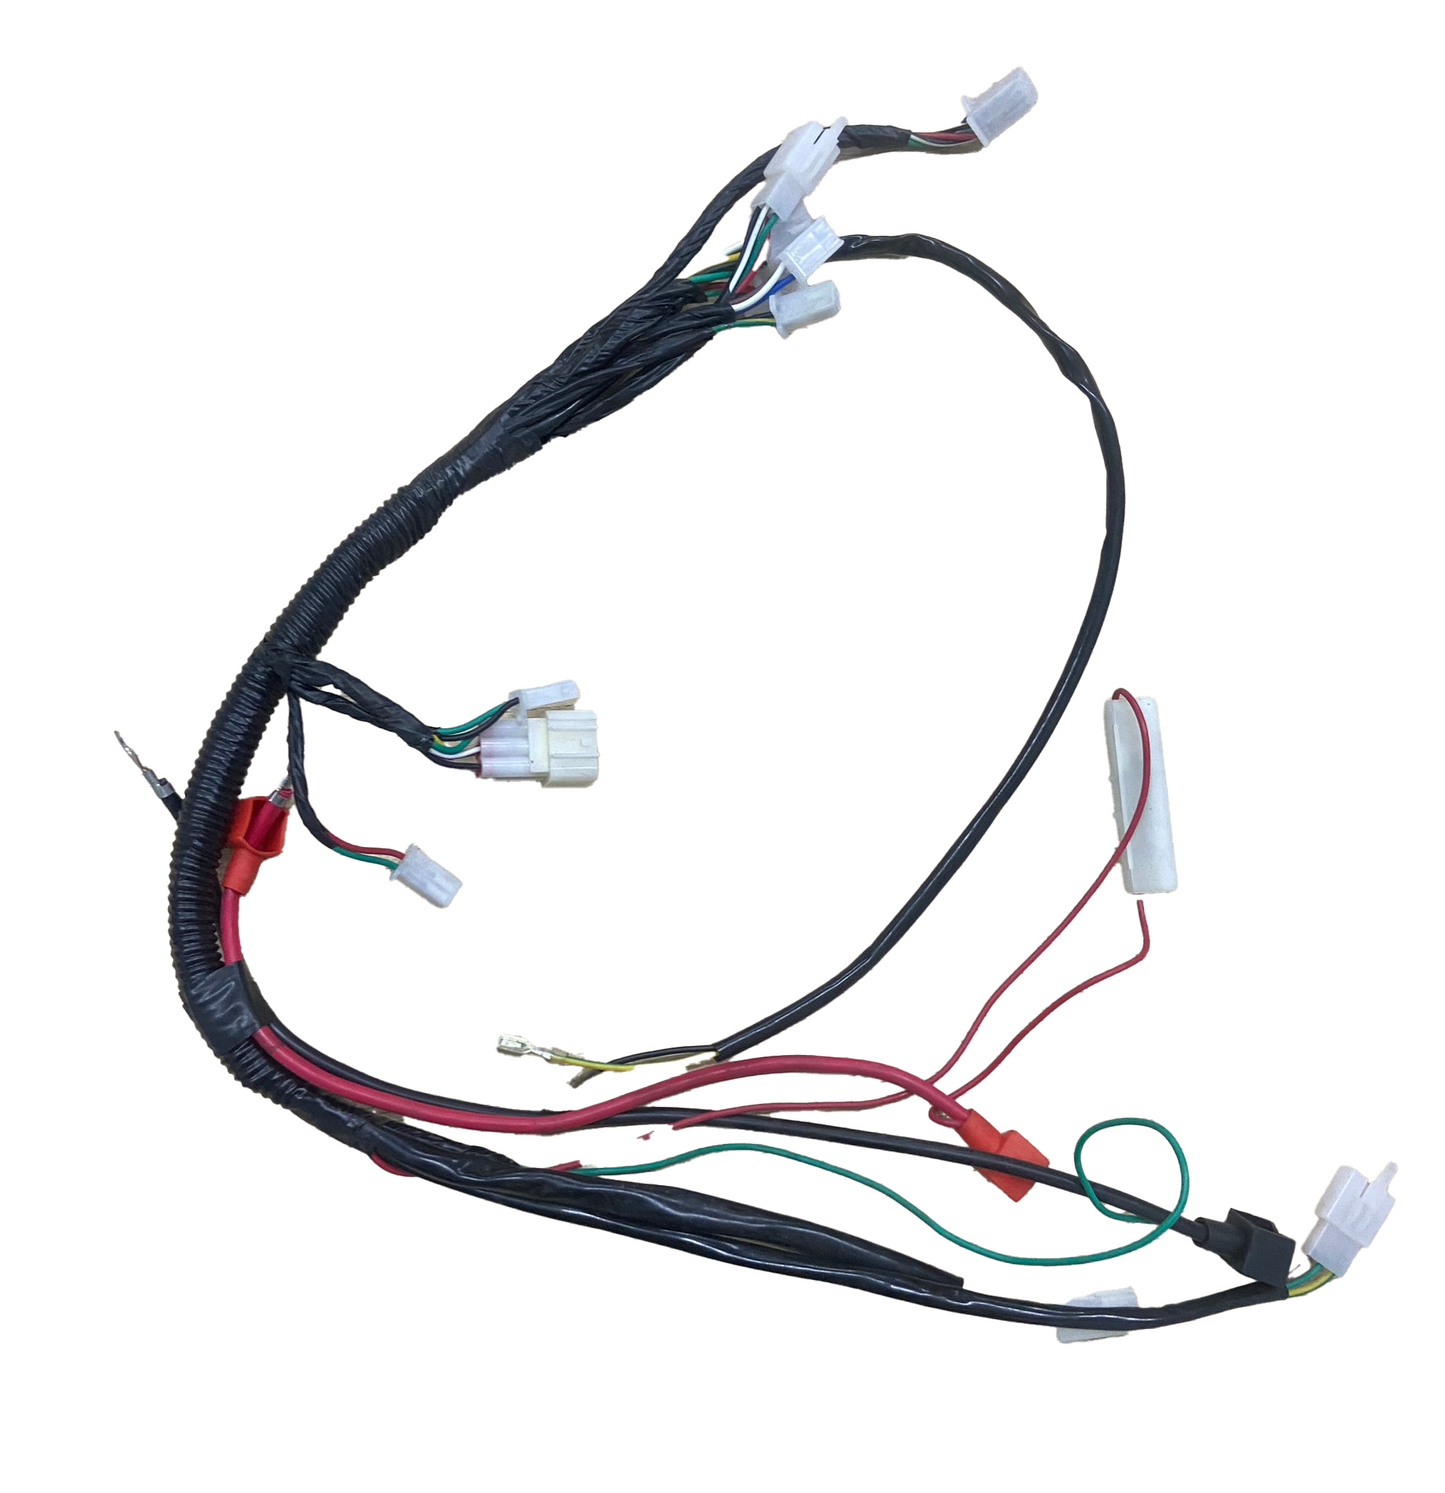 Seangles Main Wire Wiring Harness for 125cc ATV